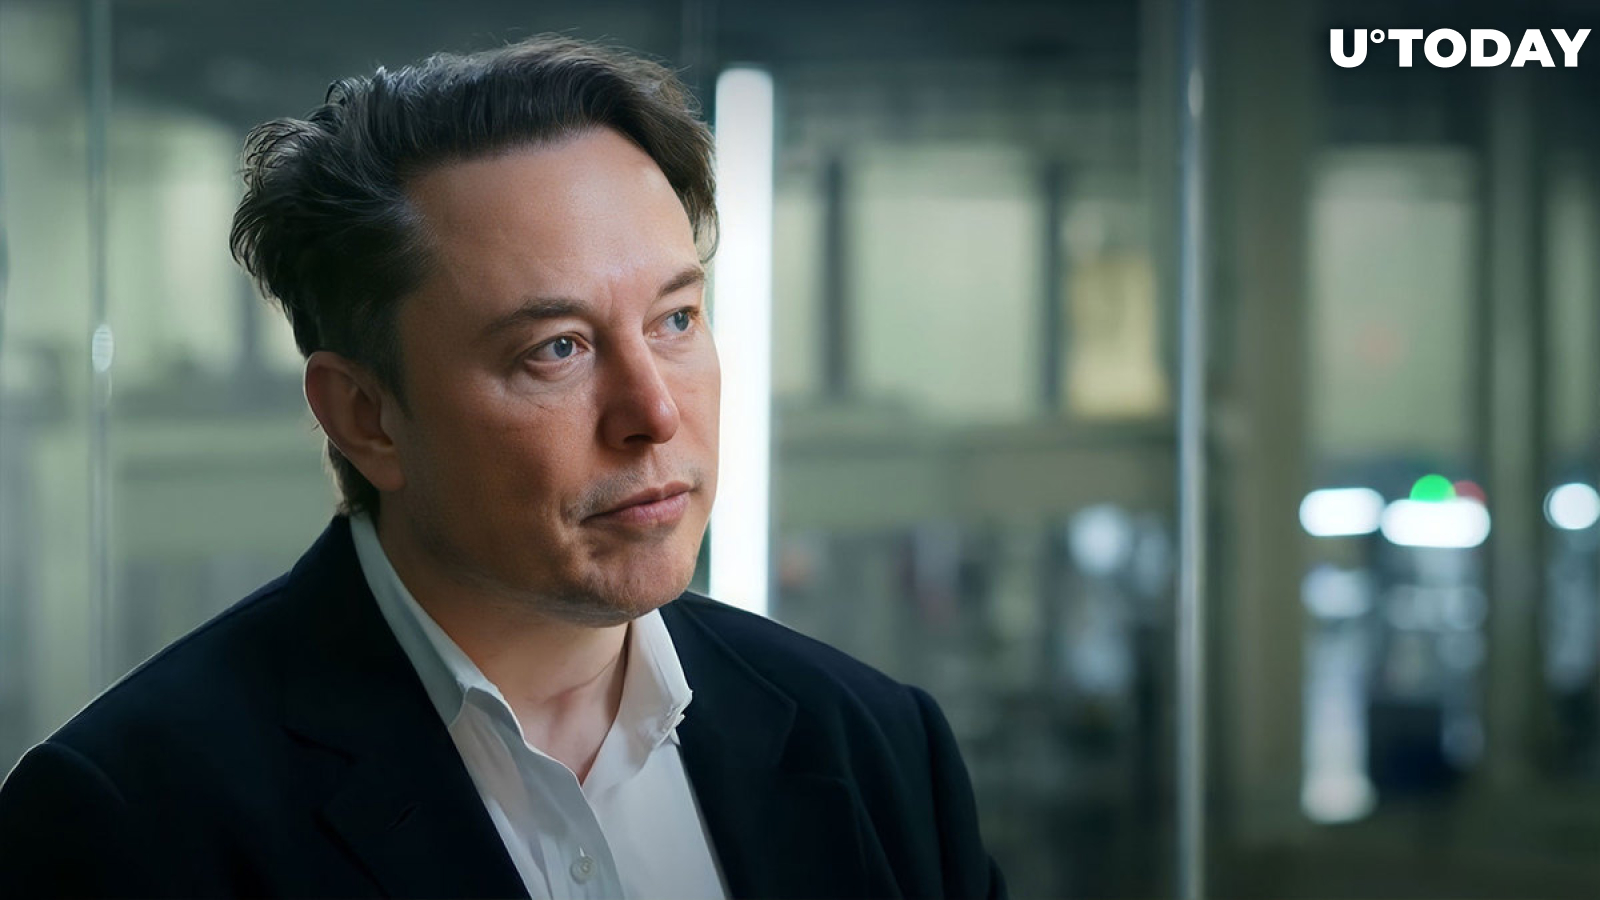 Elon Musk's ChatGPT Tweet Catches Crypto Community's Attention